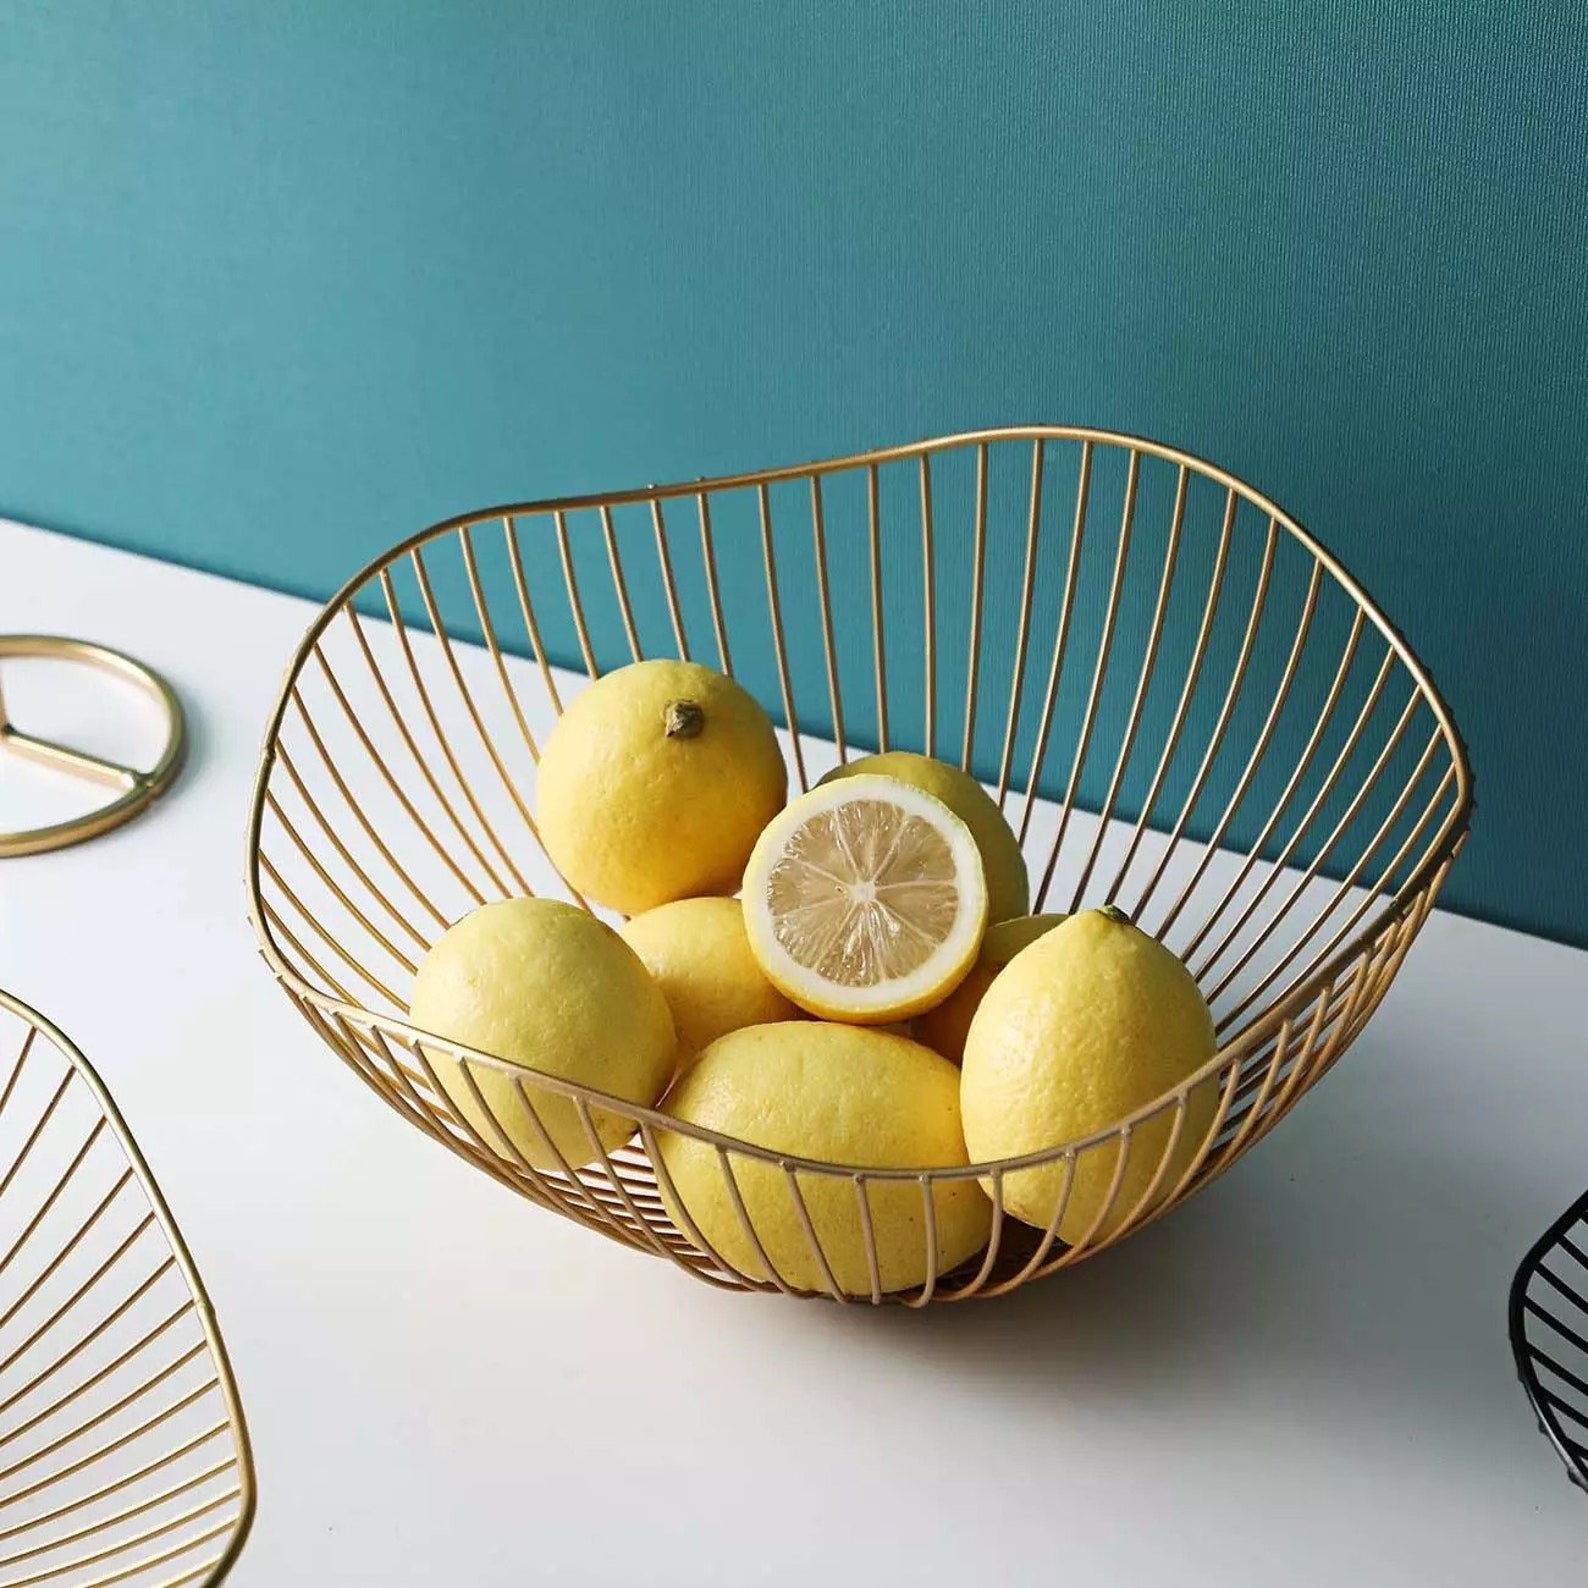 The gold wire fruit bowl with lemons inside